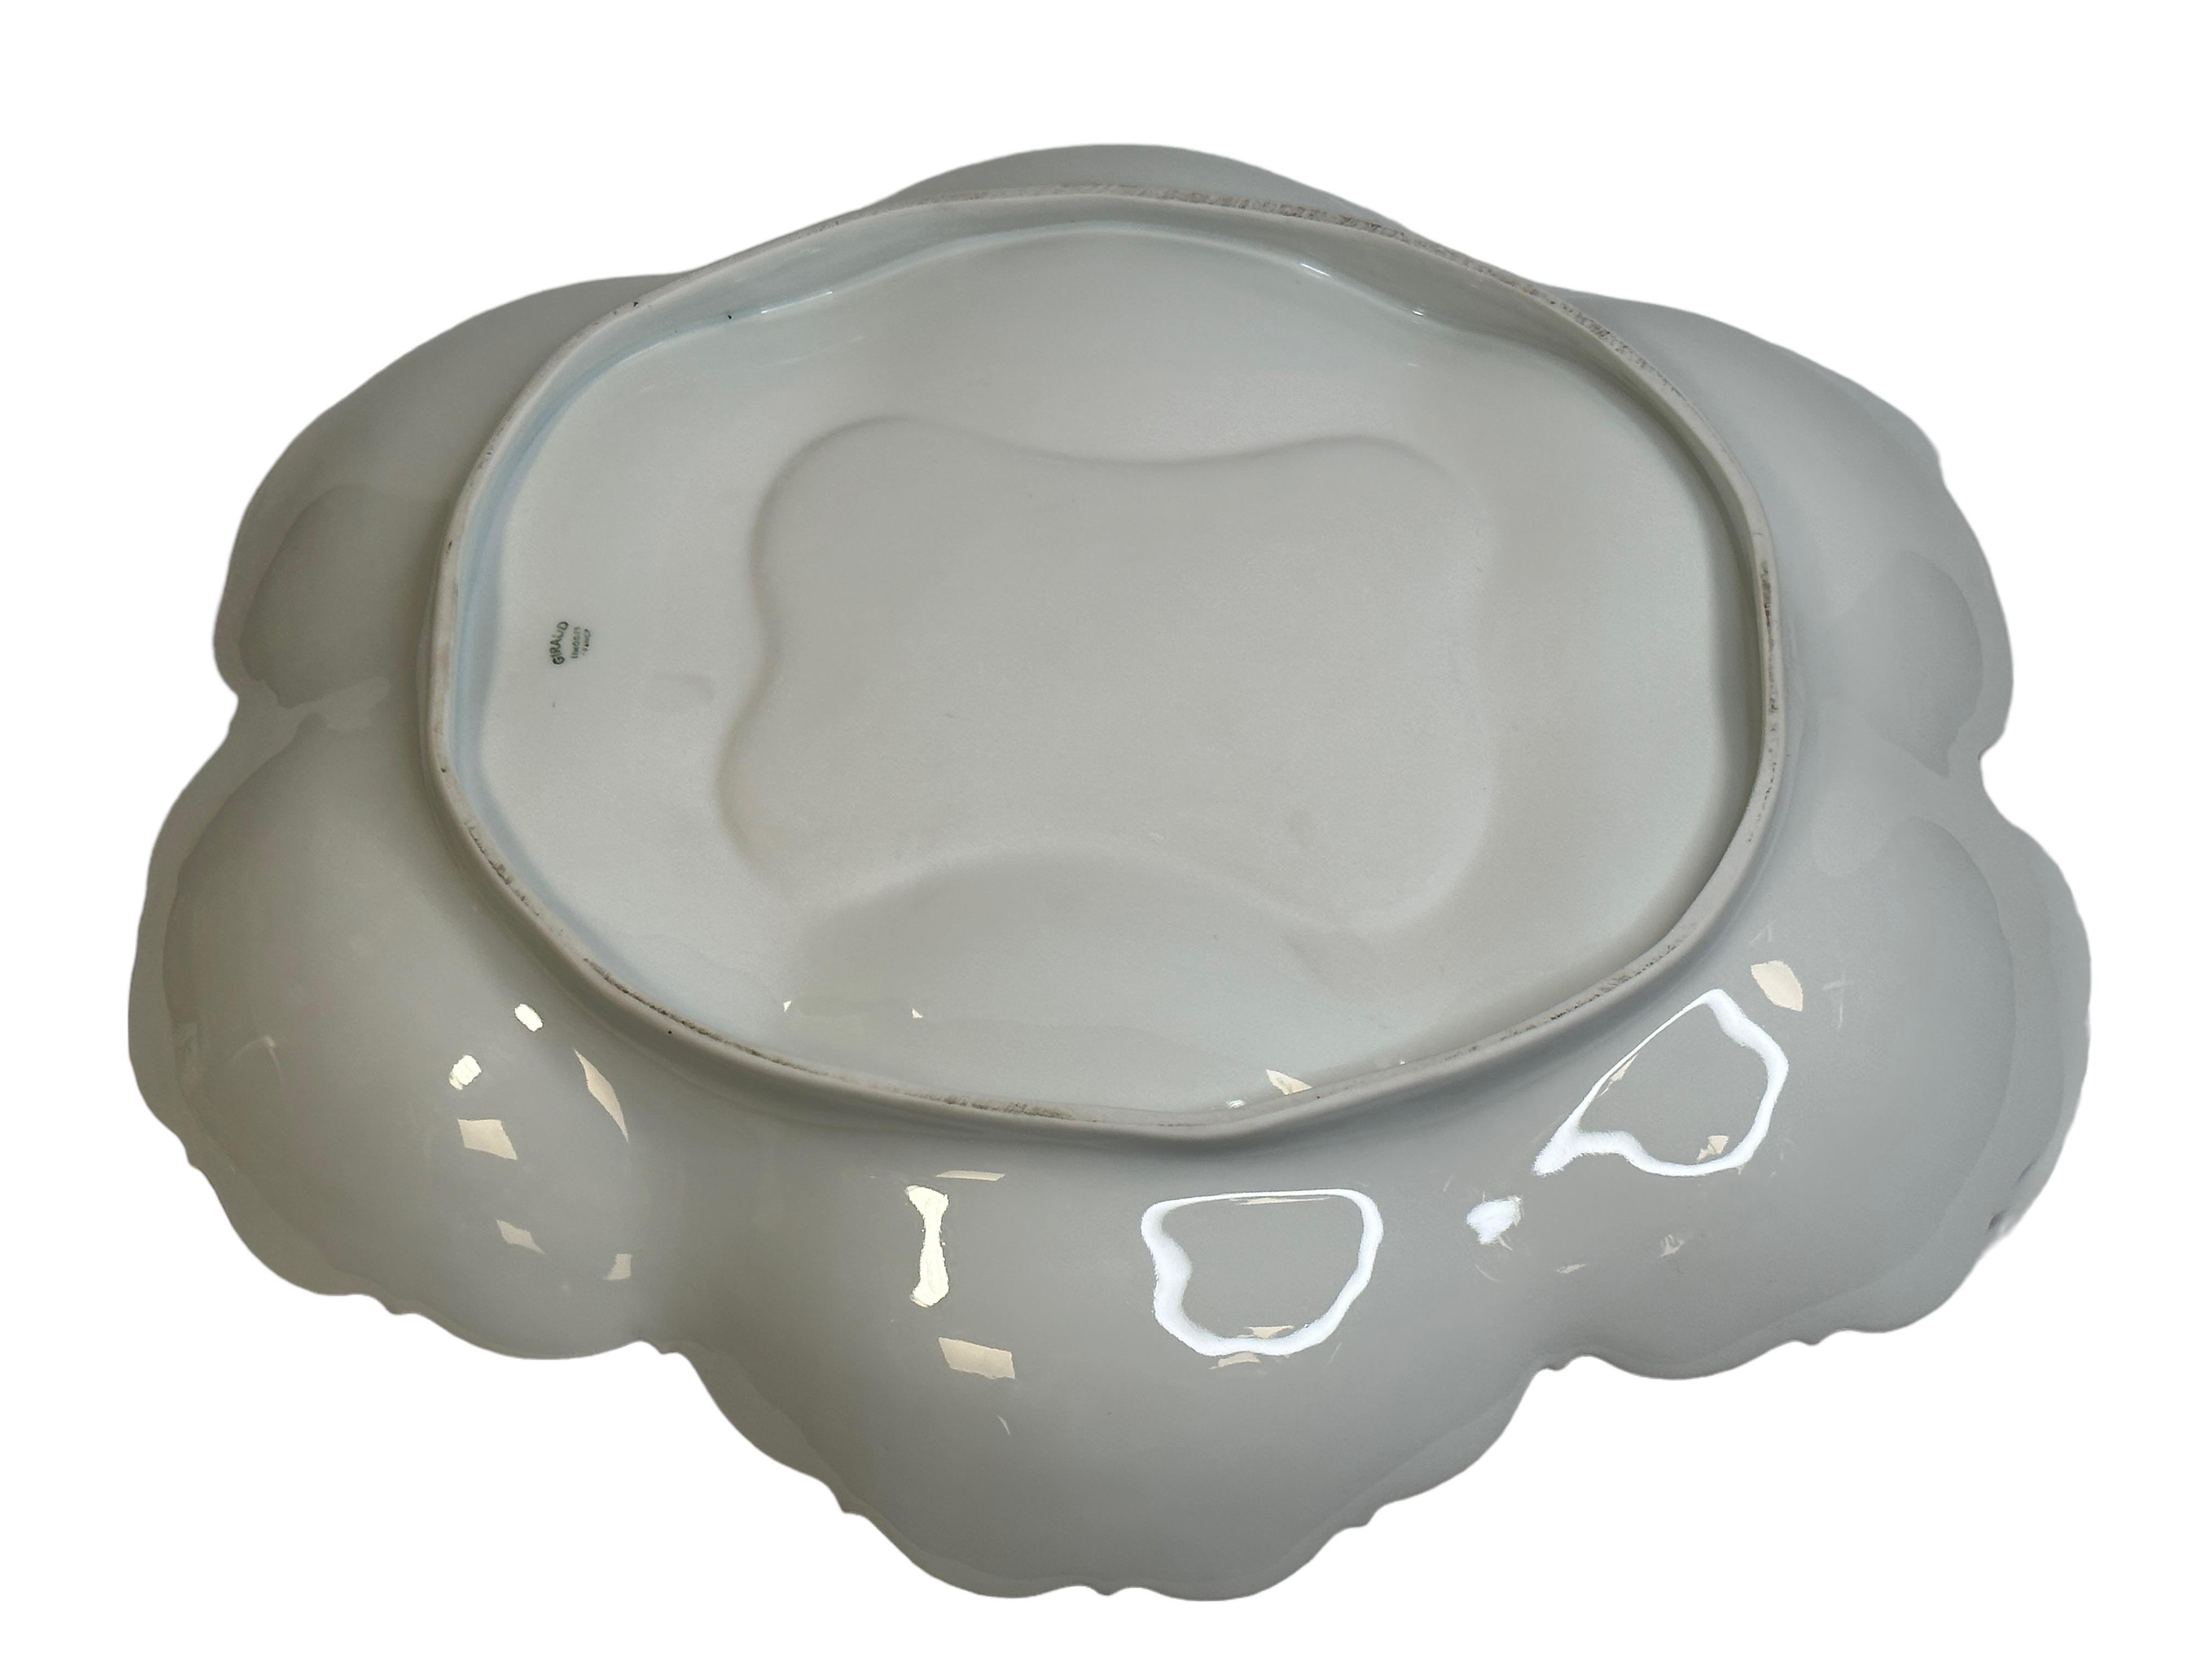 Exceptional Shell Shaped Limoges China Porcelain Soup Tureen with Dolphin Decor For Sale 8